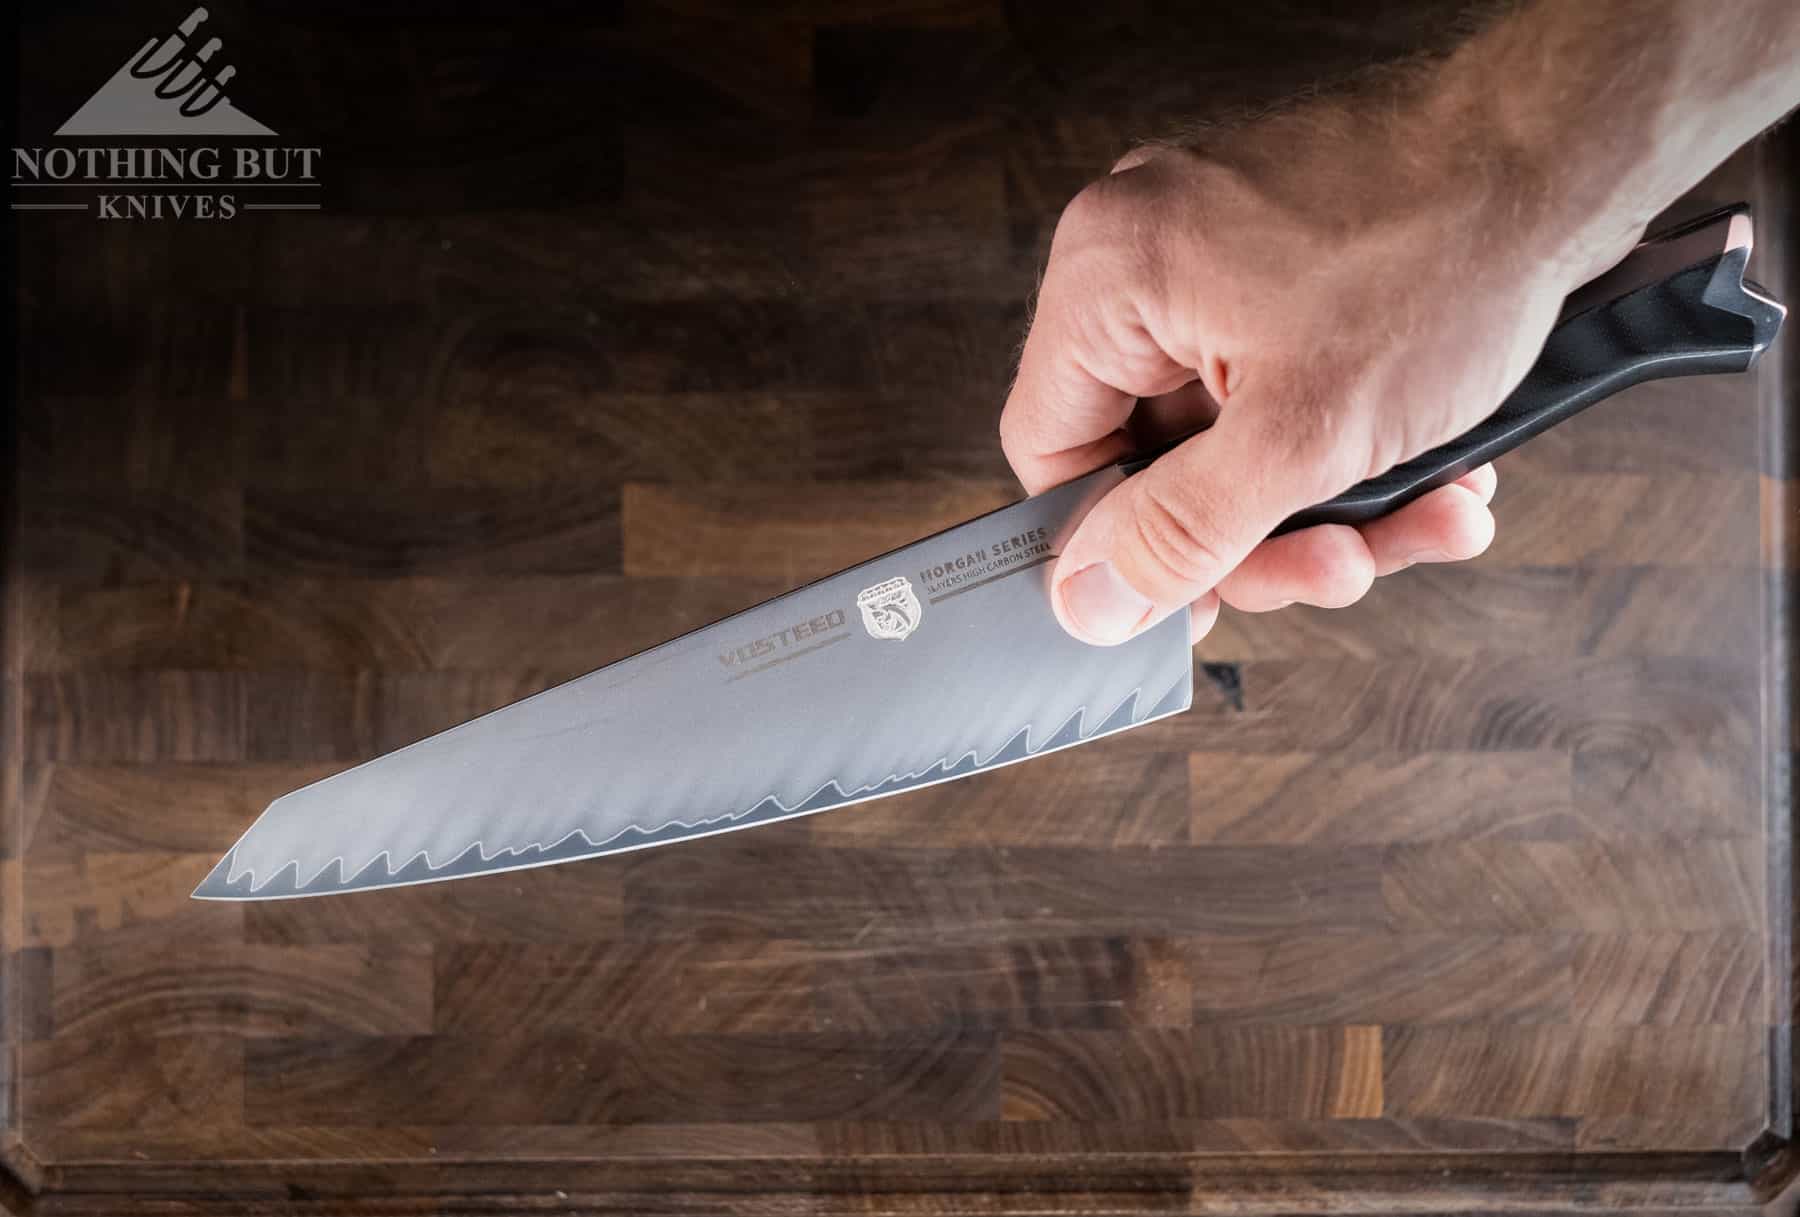 A close-up of a person's hand holding the Vosteed Morgan chef knife in a pinch grip. 